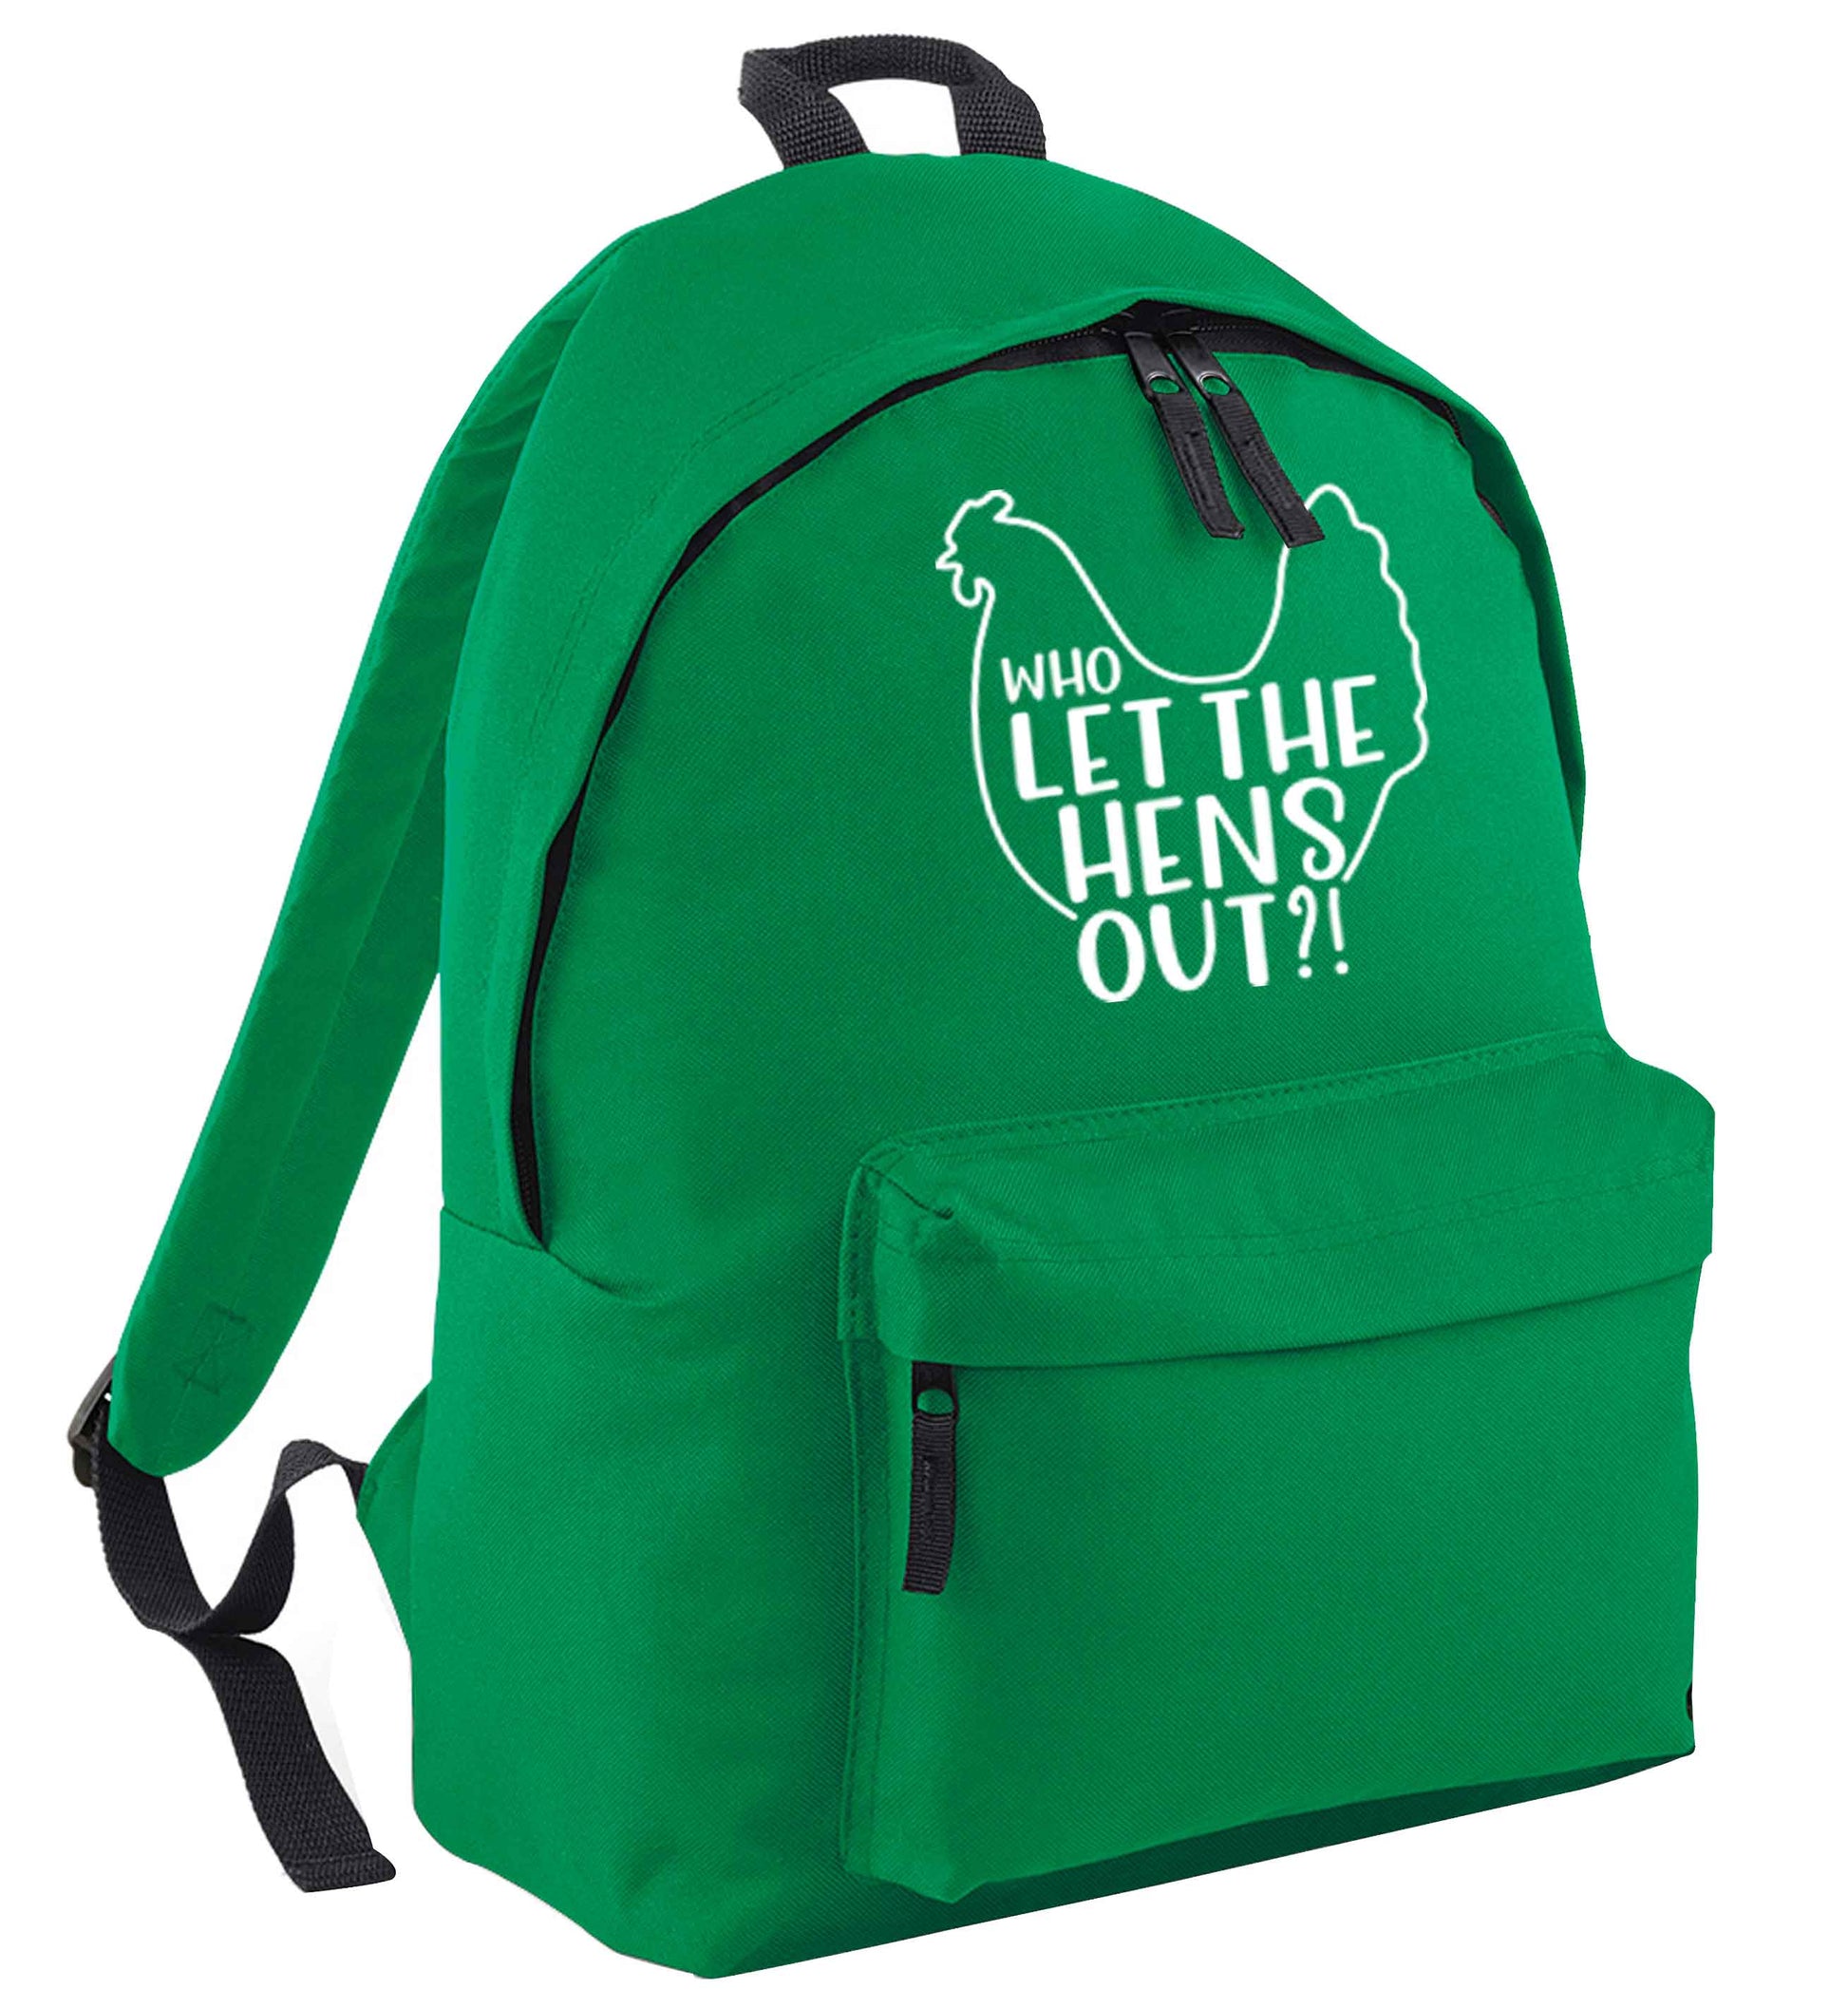 Who let the hens out green adults backpack